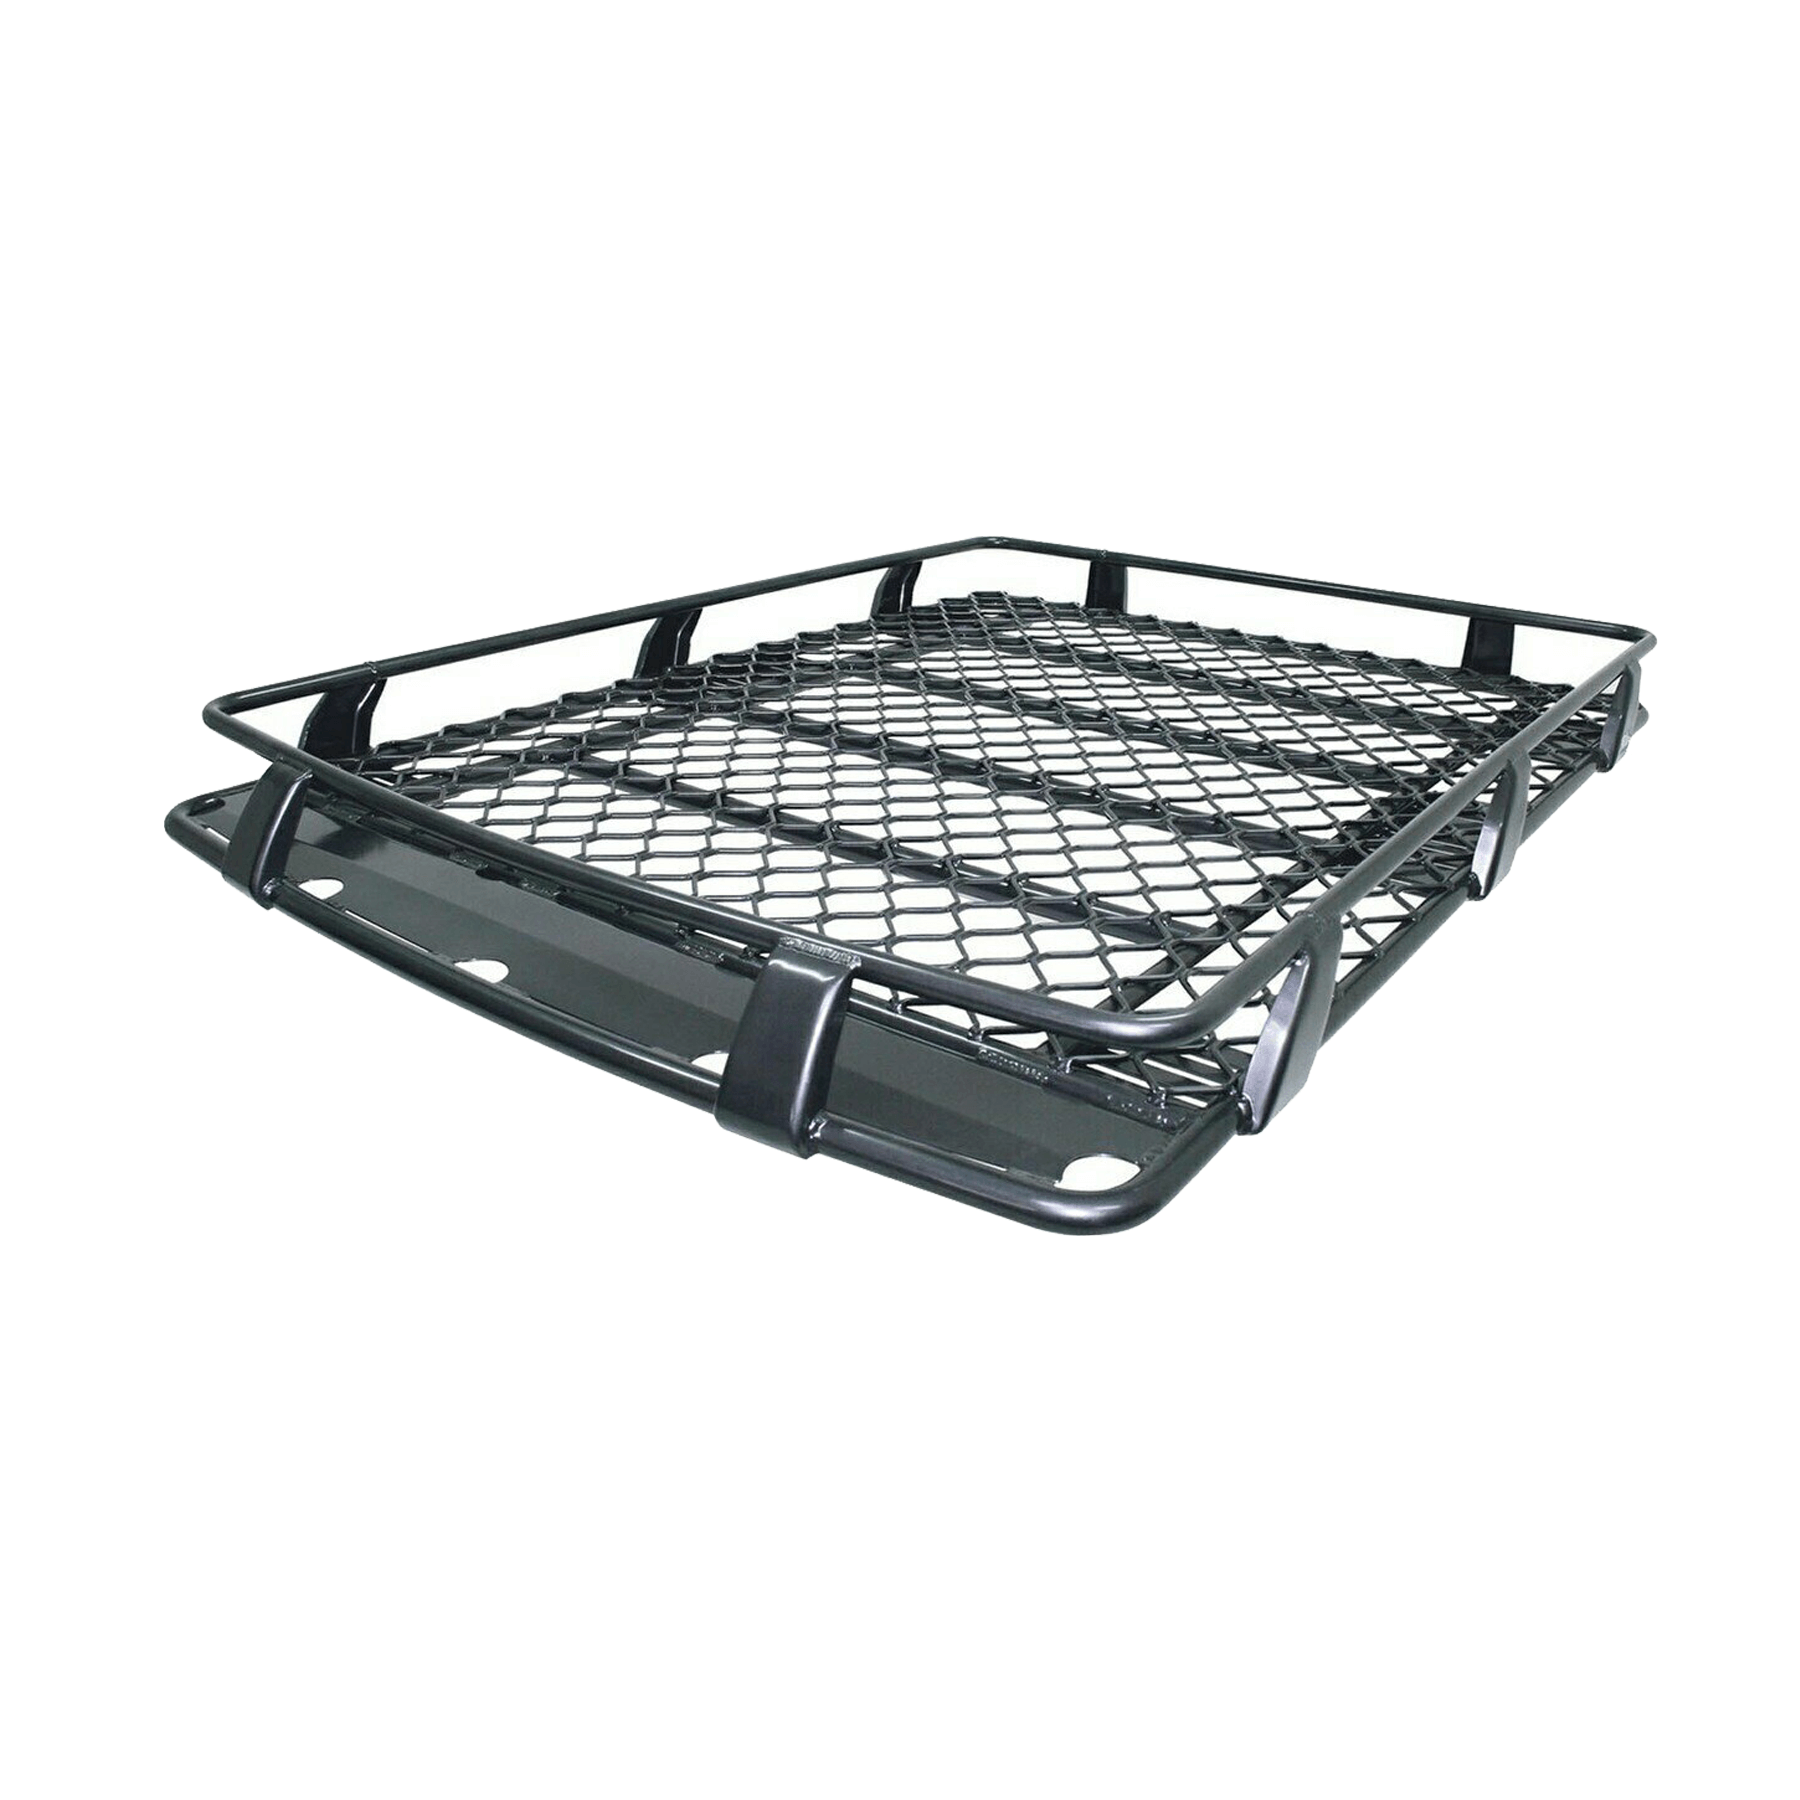 LANDCRUISER 200 SERIES 2007 TO 2015 BASKET ALLOY ROOF RACK – 2.2M X 1.25M (OPEN END)